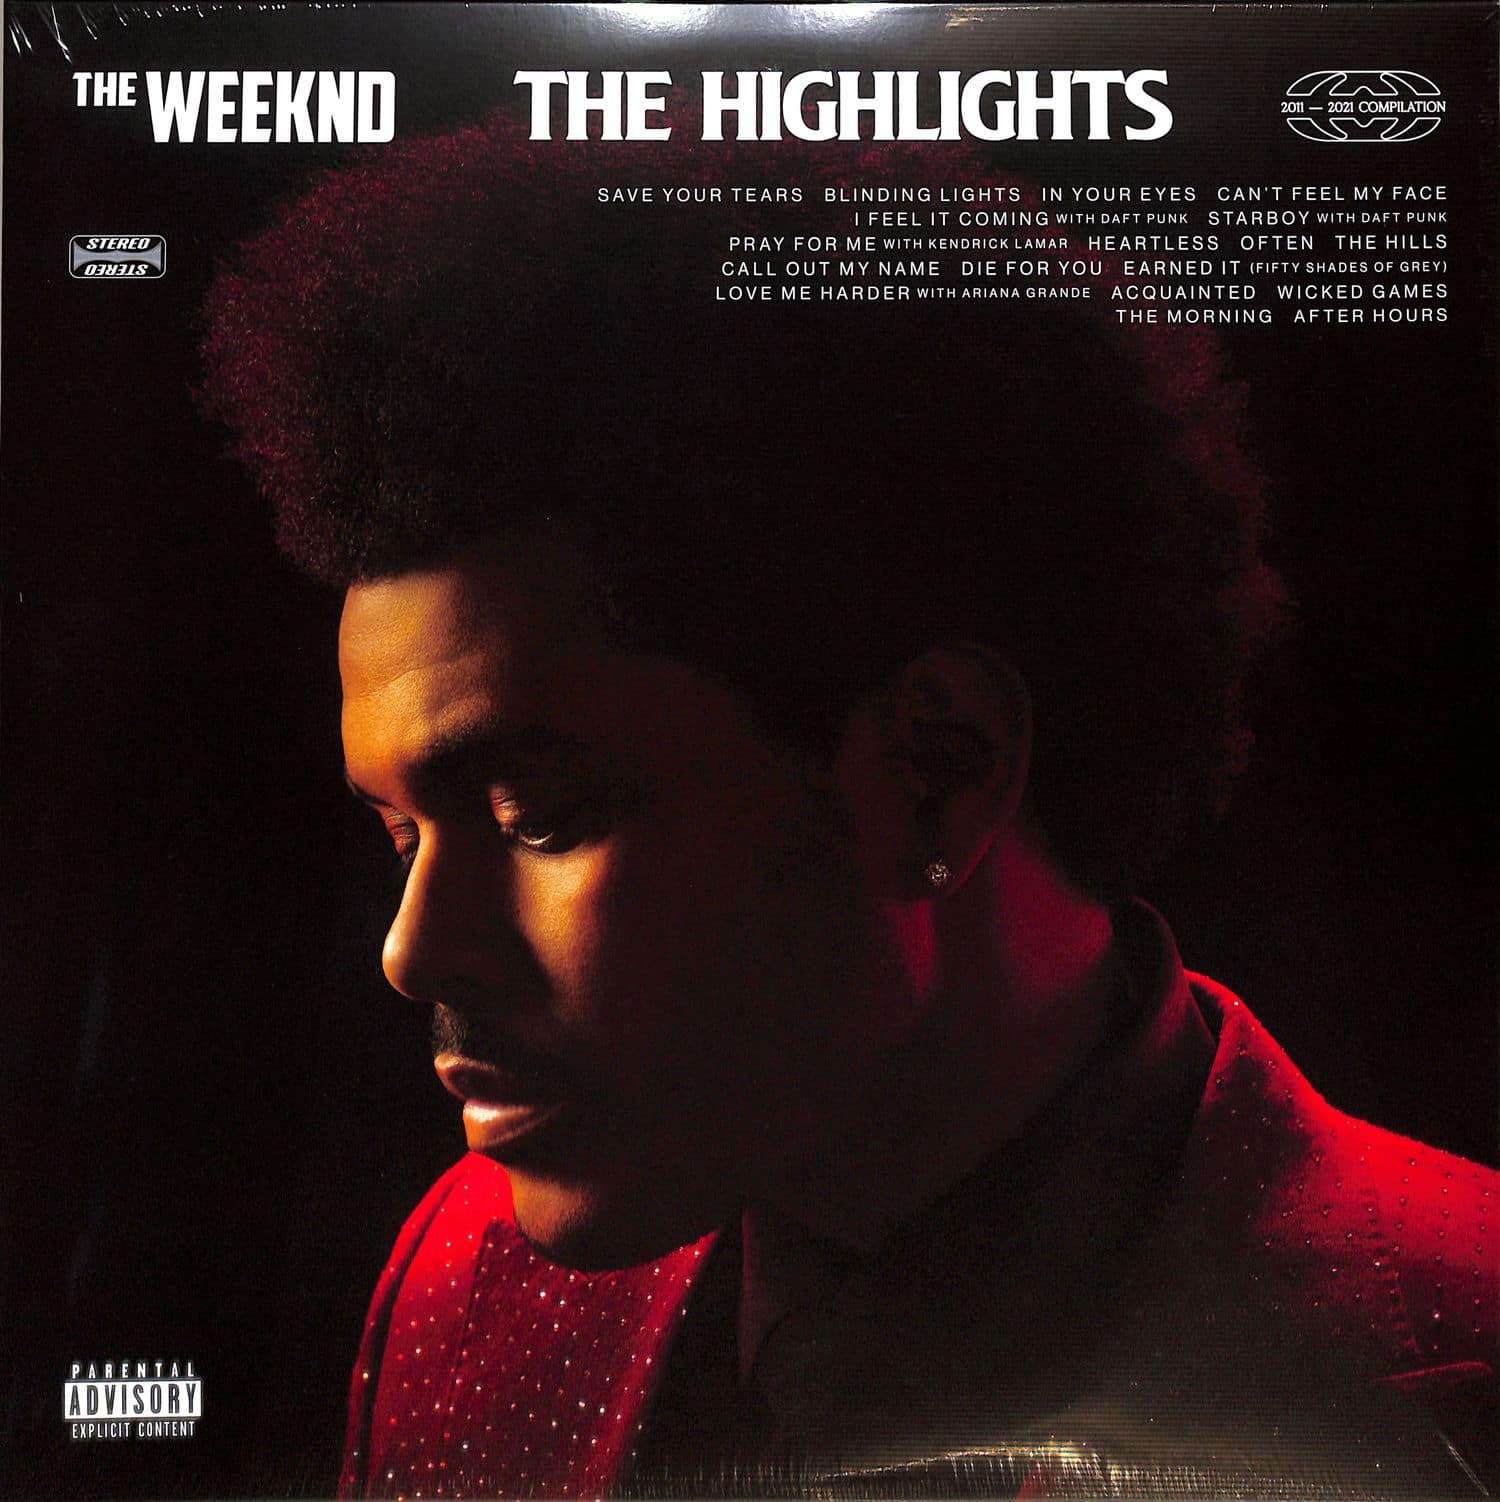 The Weeknd - THE HIGHLIGHTS 